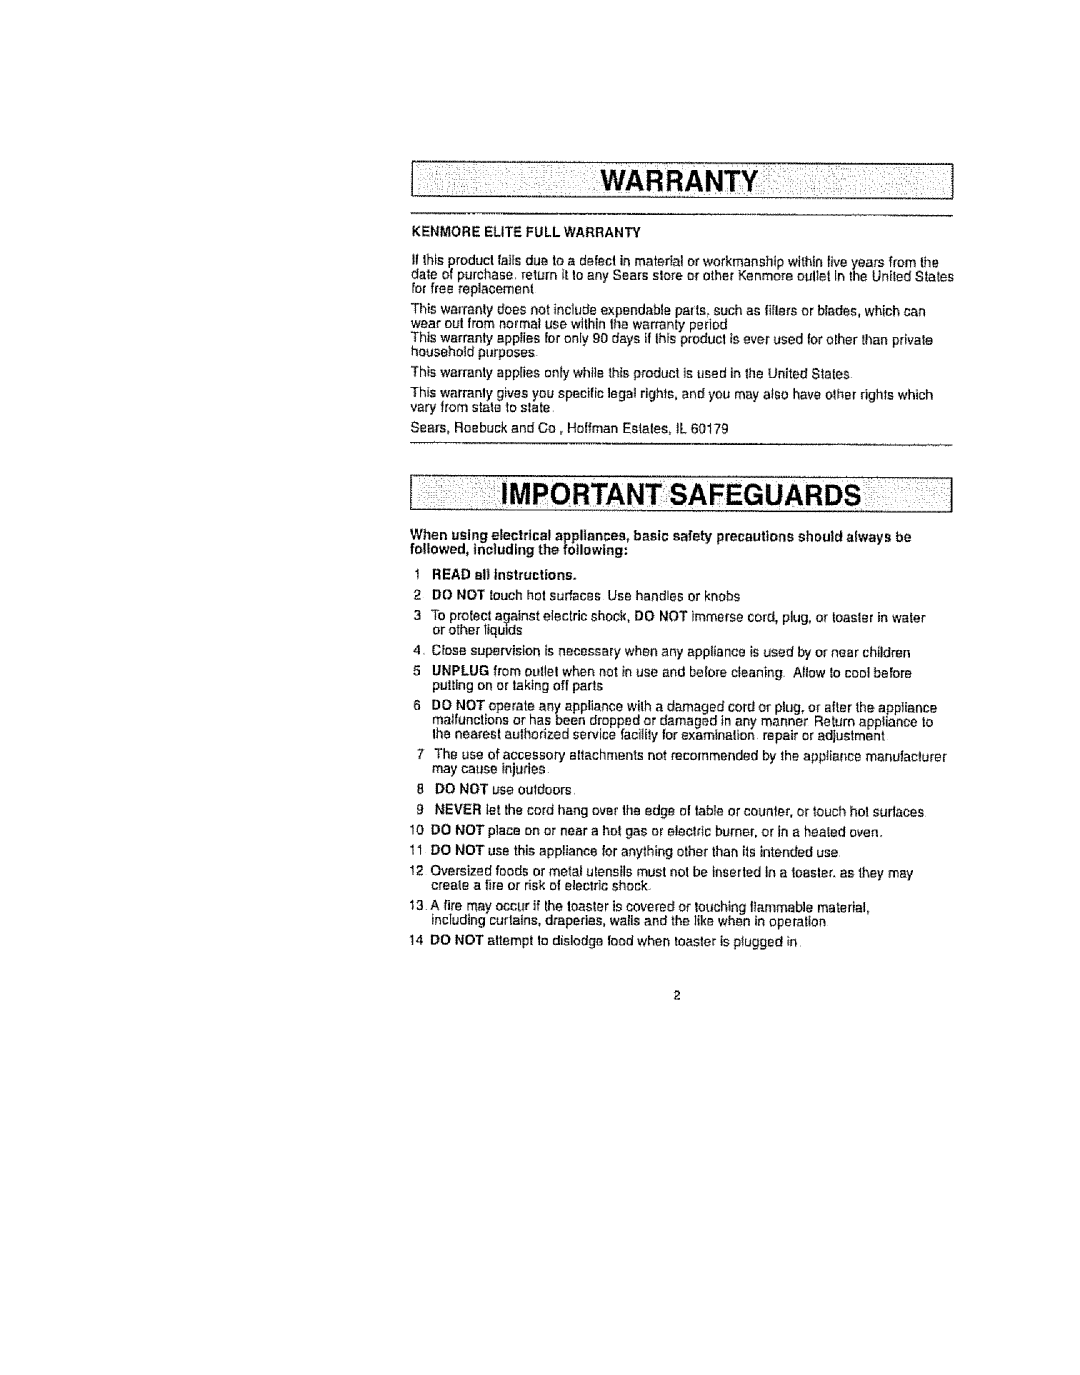 Kenmore 100.90003 manual Impo Rtant Safeguards, Kenmore Elite Full Warranty, t READ allinstructions 